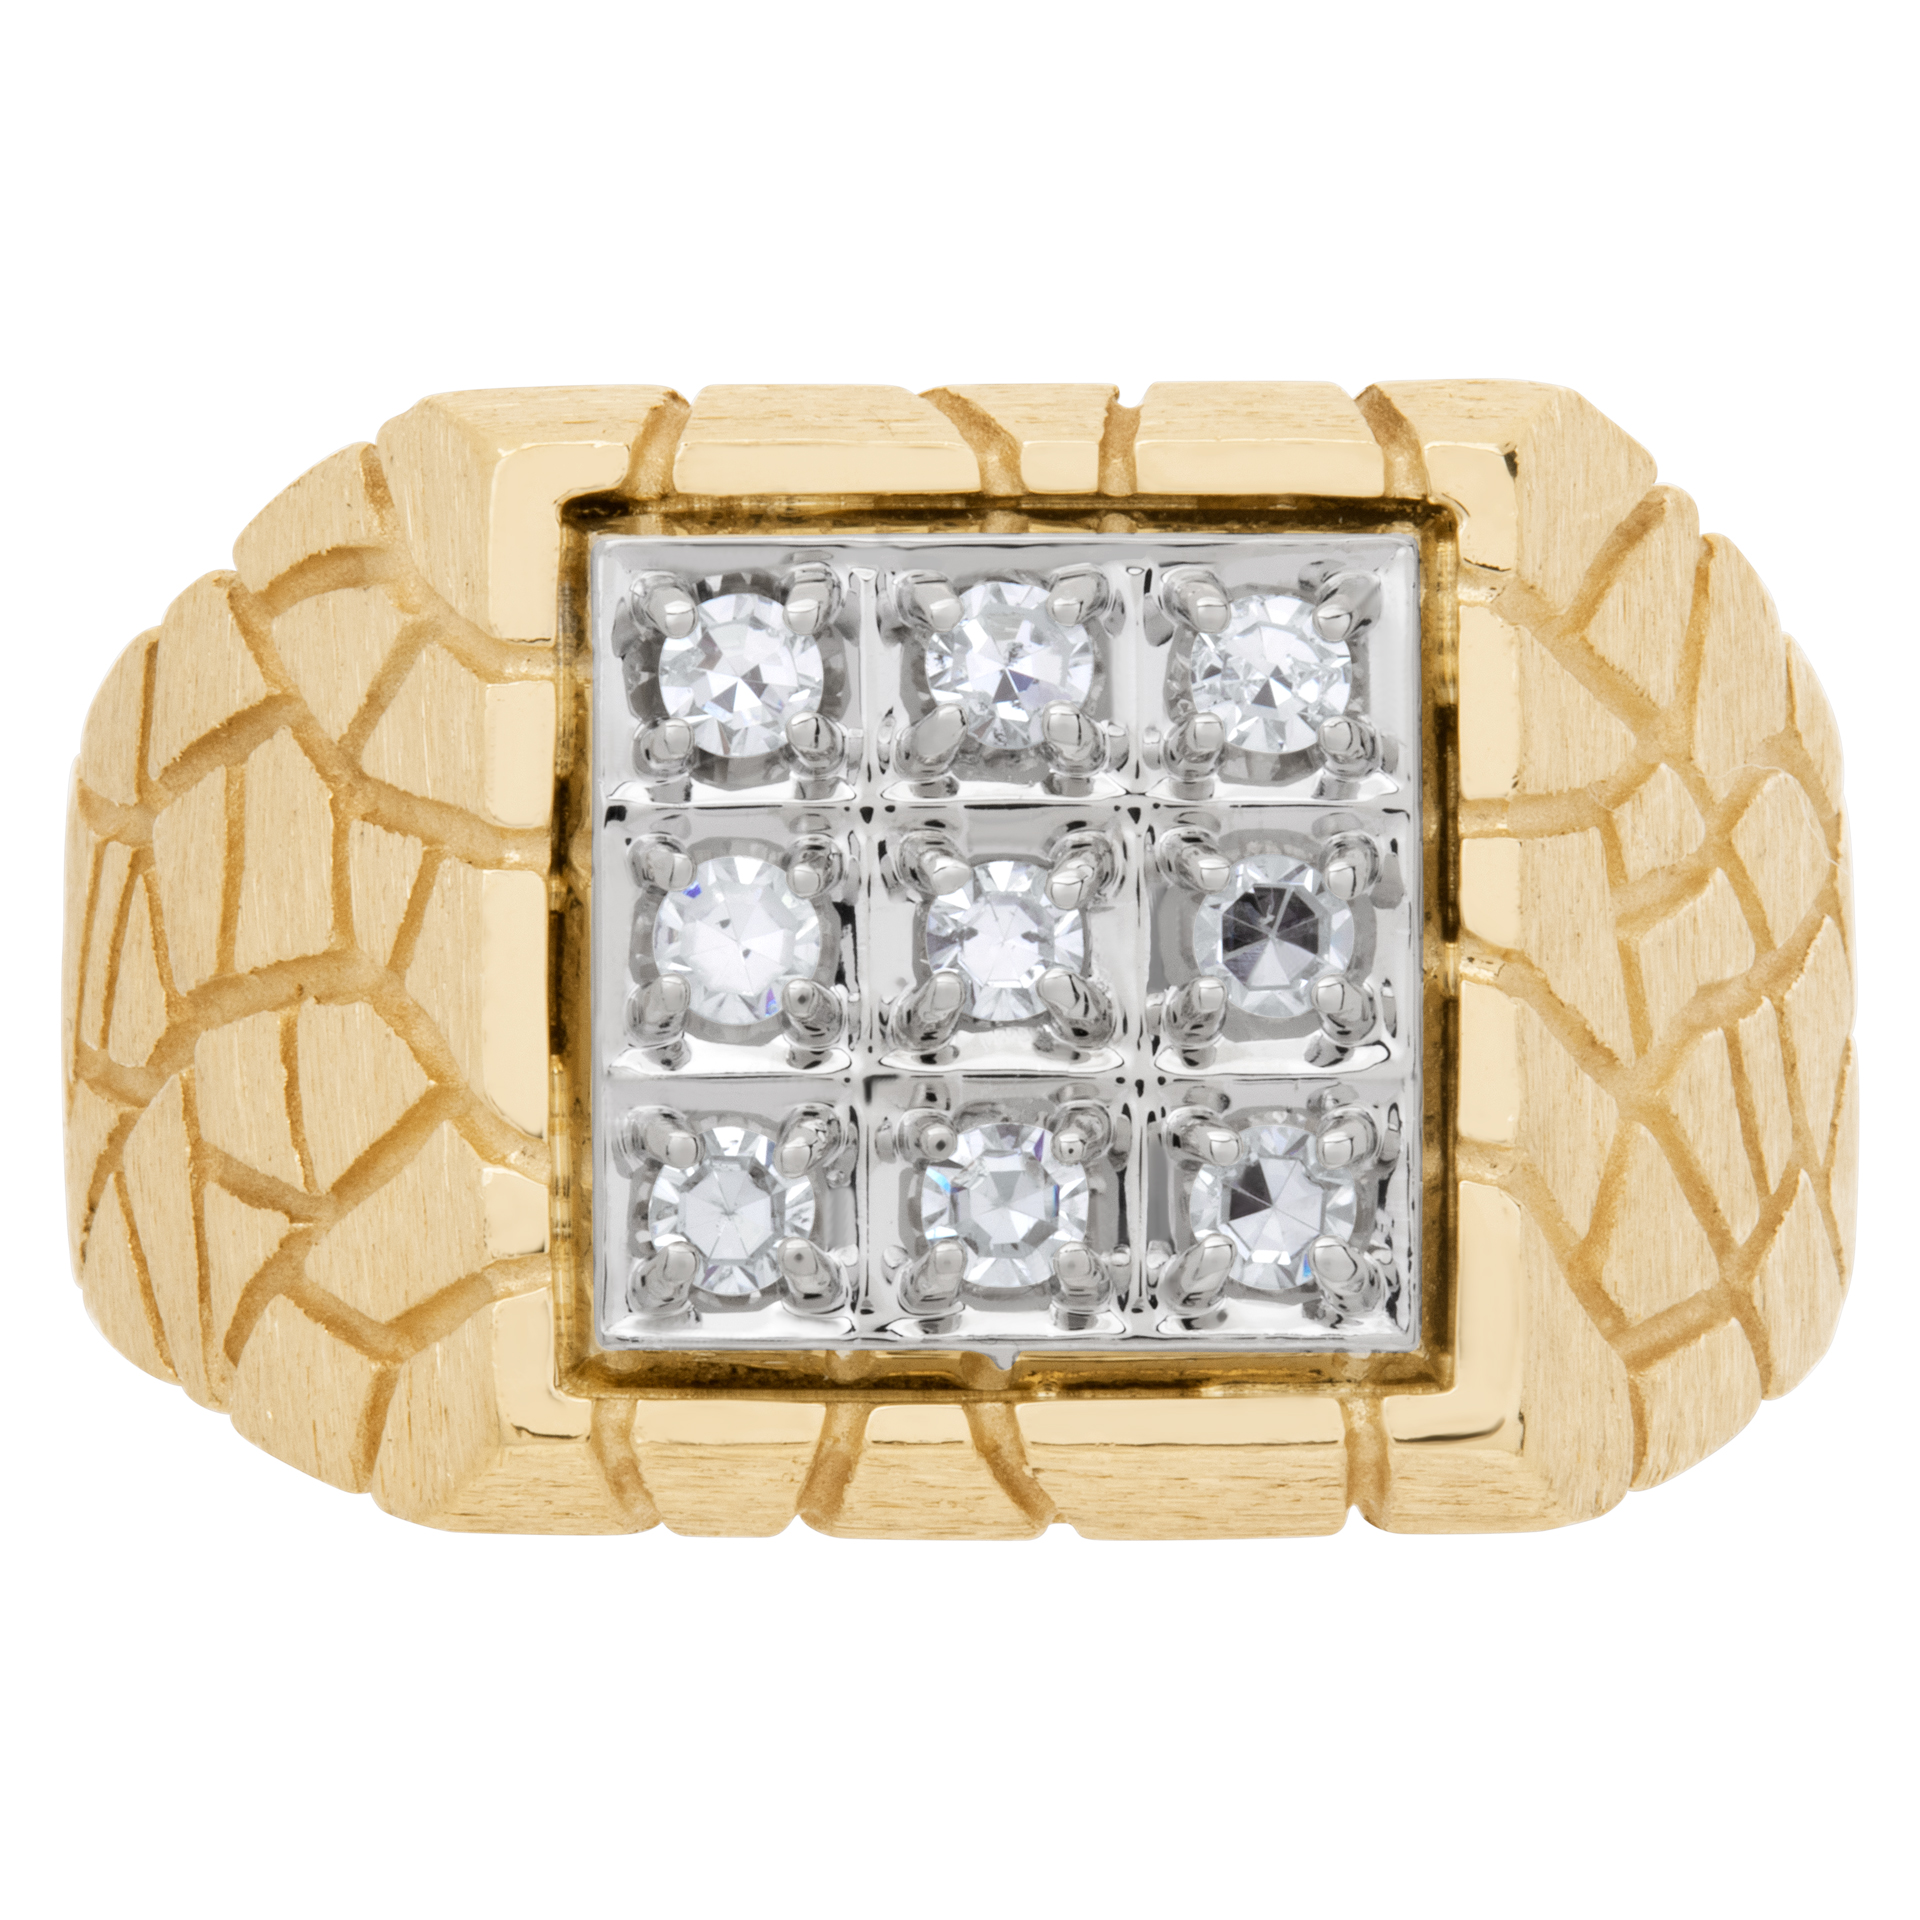 Gents diamond ring set in 14k yellow gold. 0.50 carats in diamonds. Size 10 image 2